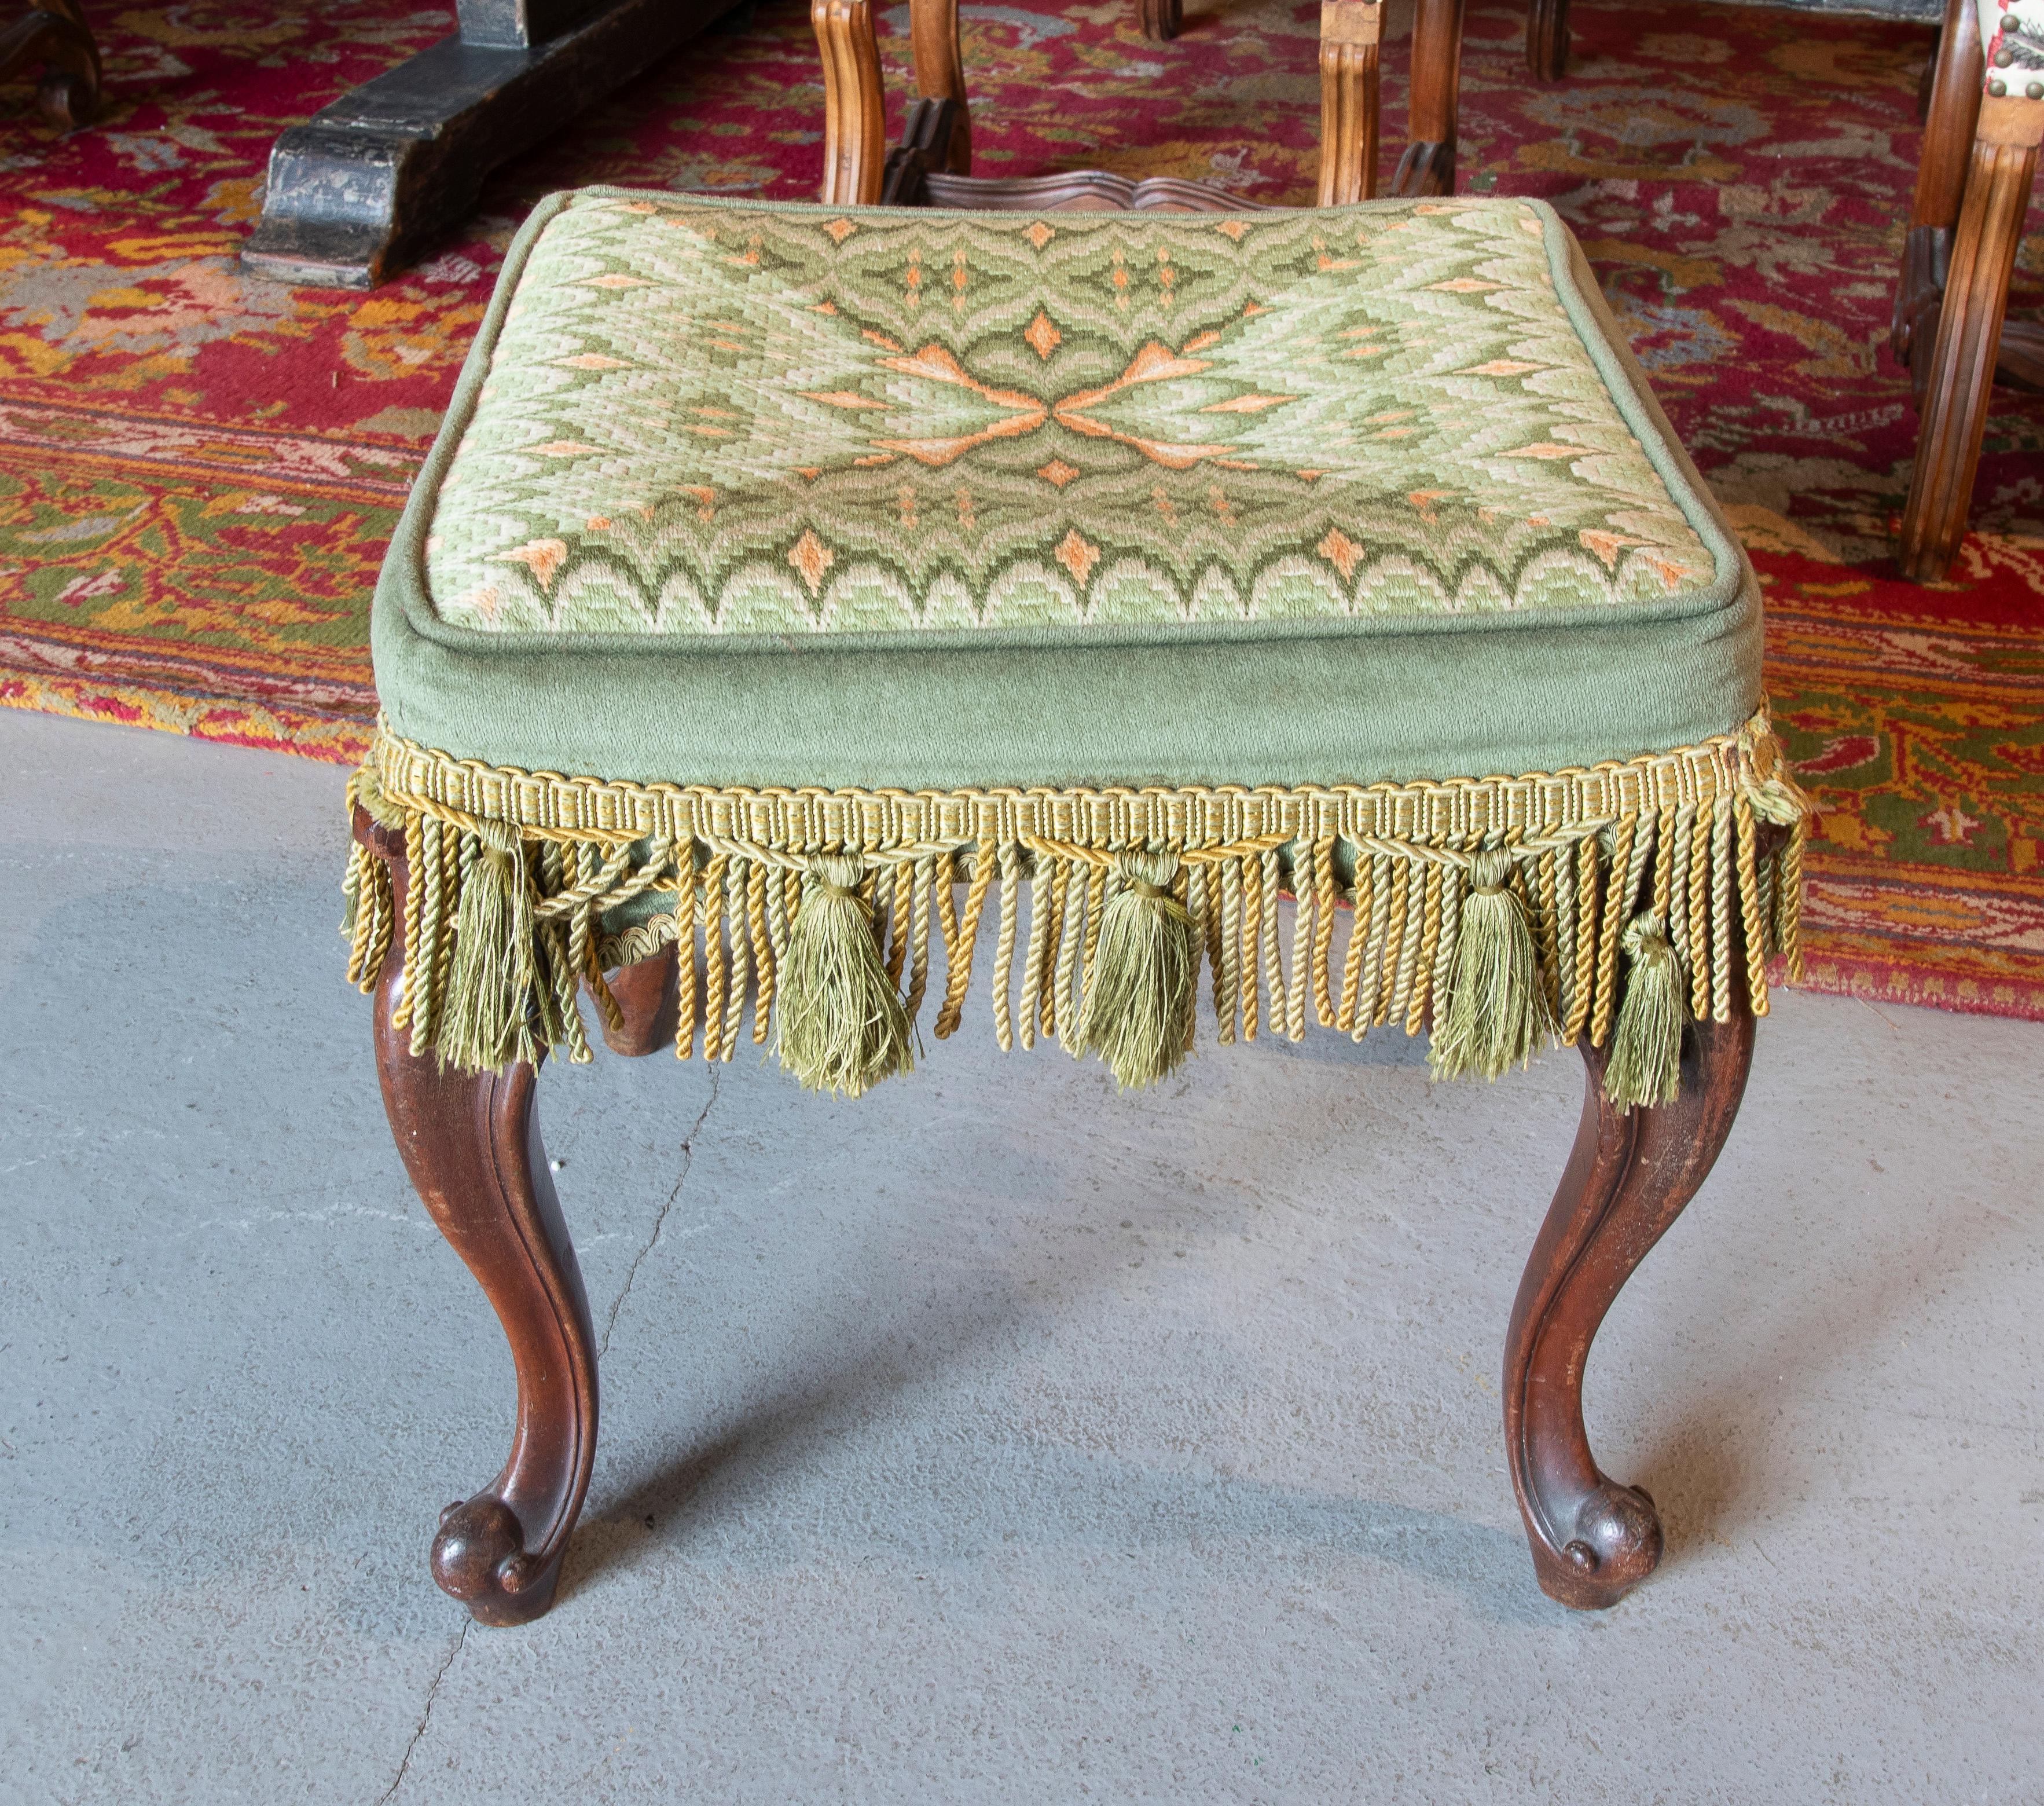 19th Century English Mahogany Stool with Embroidered Seat  In Good Condition For Sale In Marbella, ES